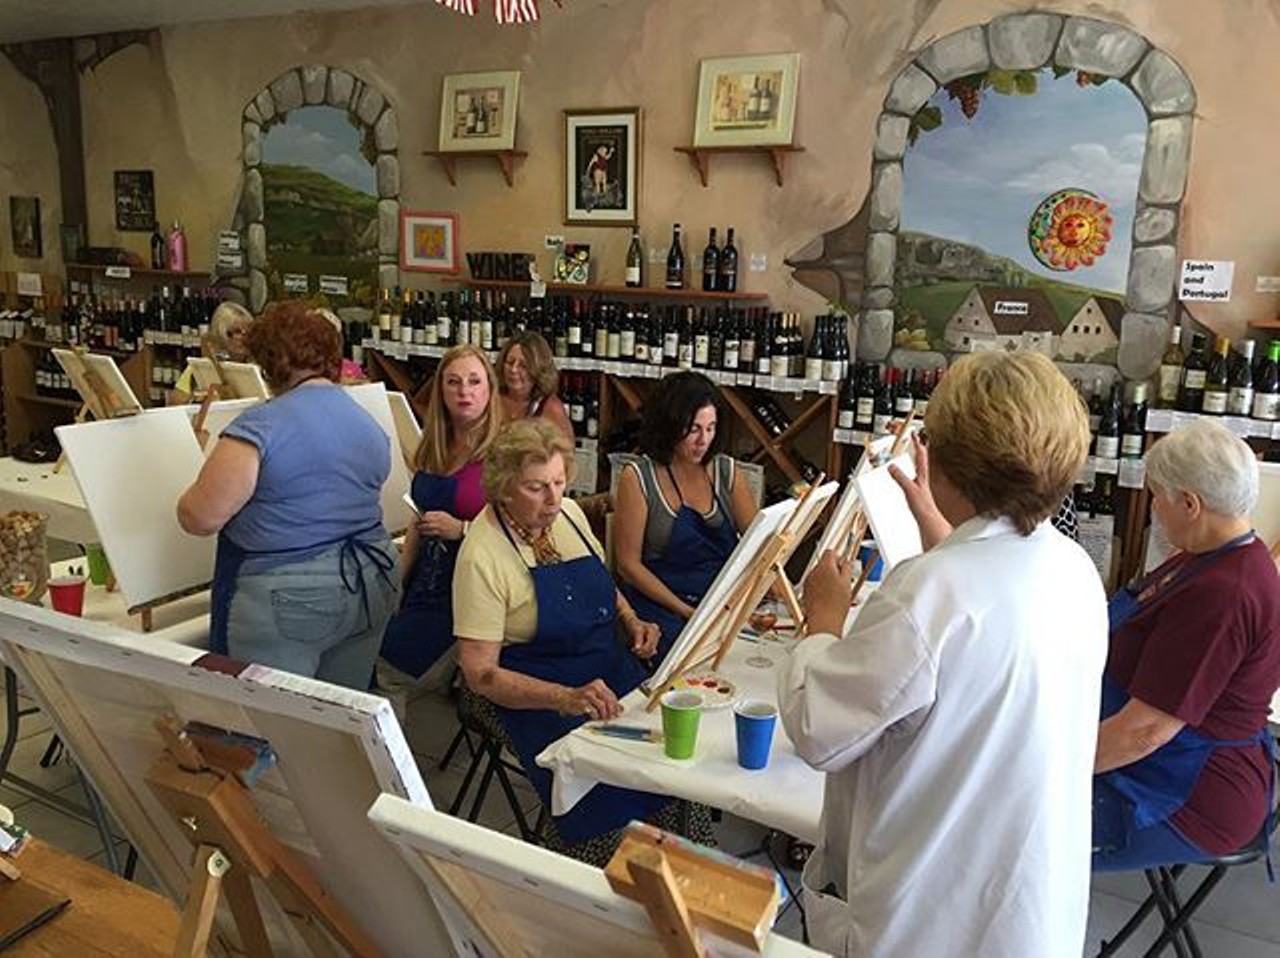 Sip your finest wine and paint a work of art at Yes You Canvas
1500 Alafaya Trail #1008, Oviedo, (407) 542-8969
At Yes You Canvas, wine is encourage while painting whatever comes to mind. If you&#146;re not great at painting, there are teachers present to help you cultivate your artistic talents. Classes go for around $20.
Photo via yesyoucanvas_oviedo/Instagram